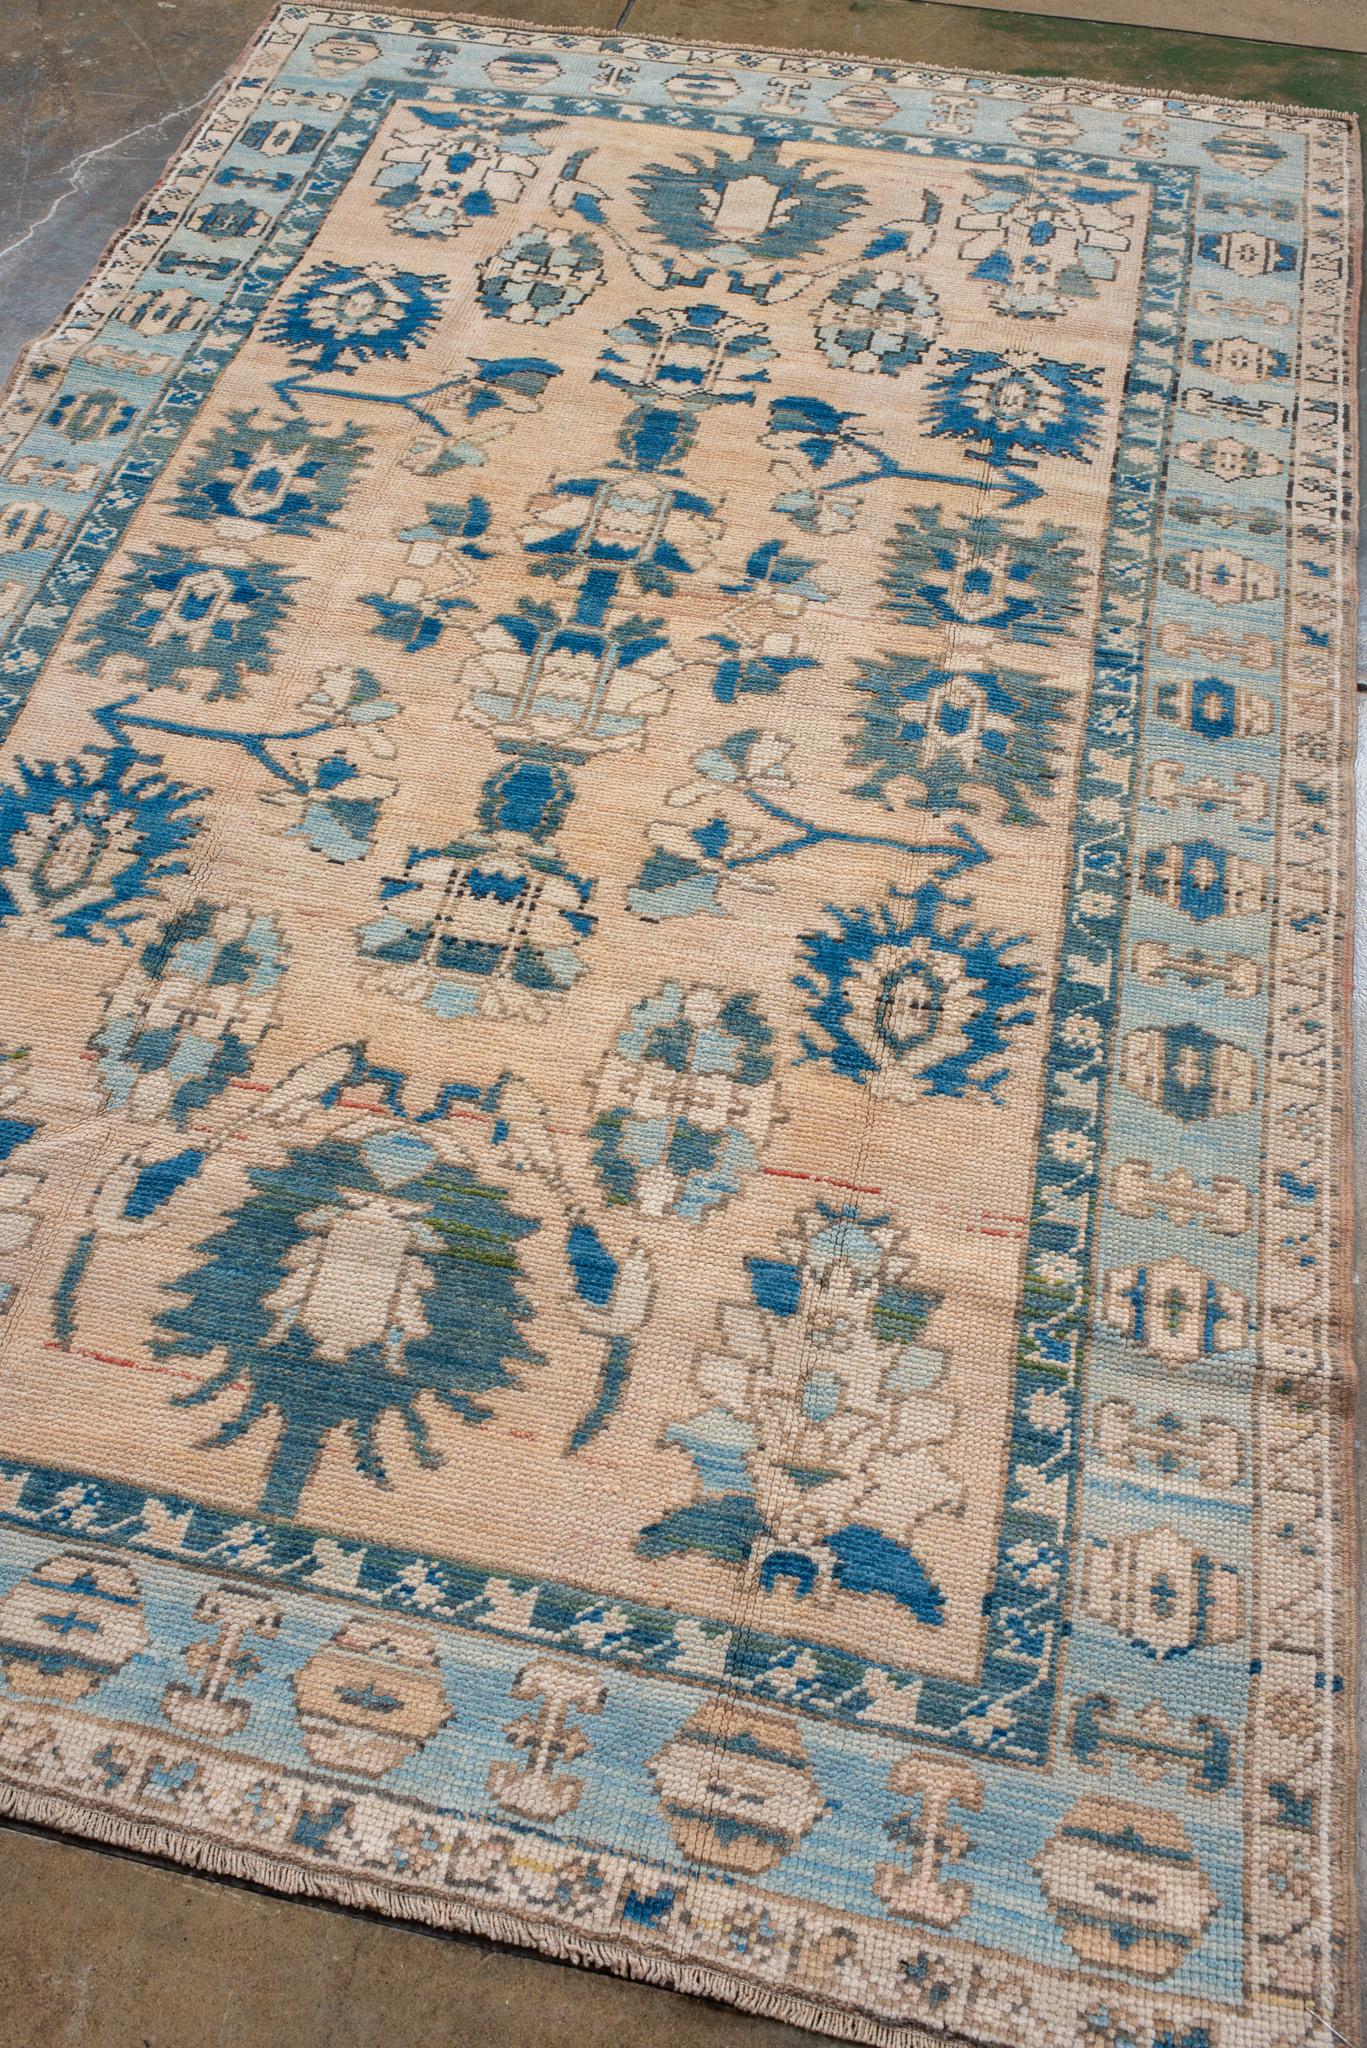 An Oushak Rug circa 1970. Handknotted with 100% wool yarn.